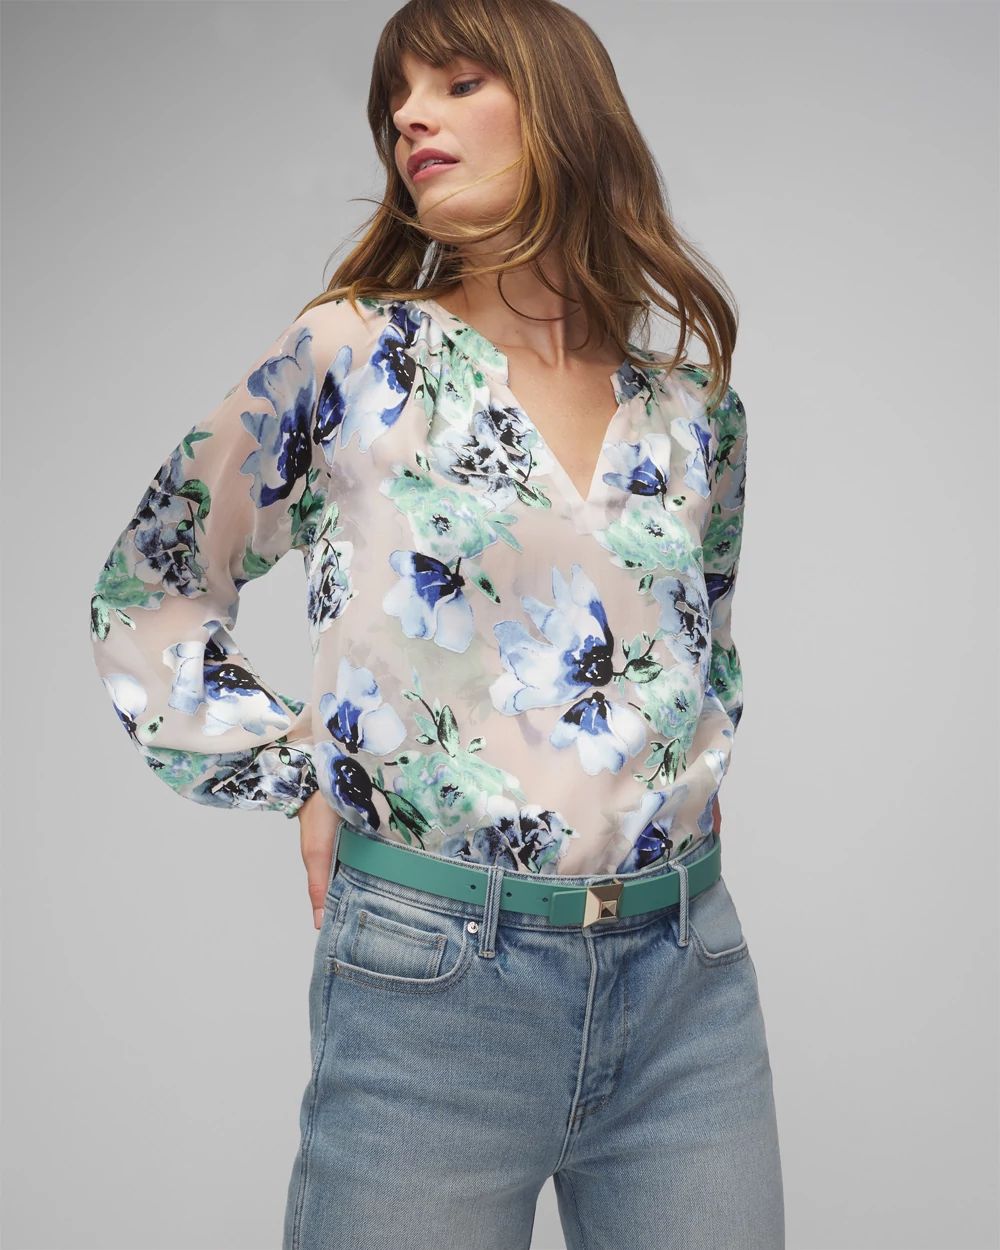 Long Sleeve Floral Silk Burnout Blouse click to view larger image.